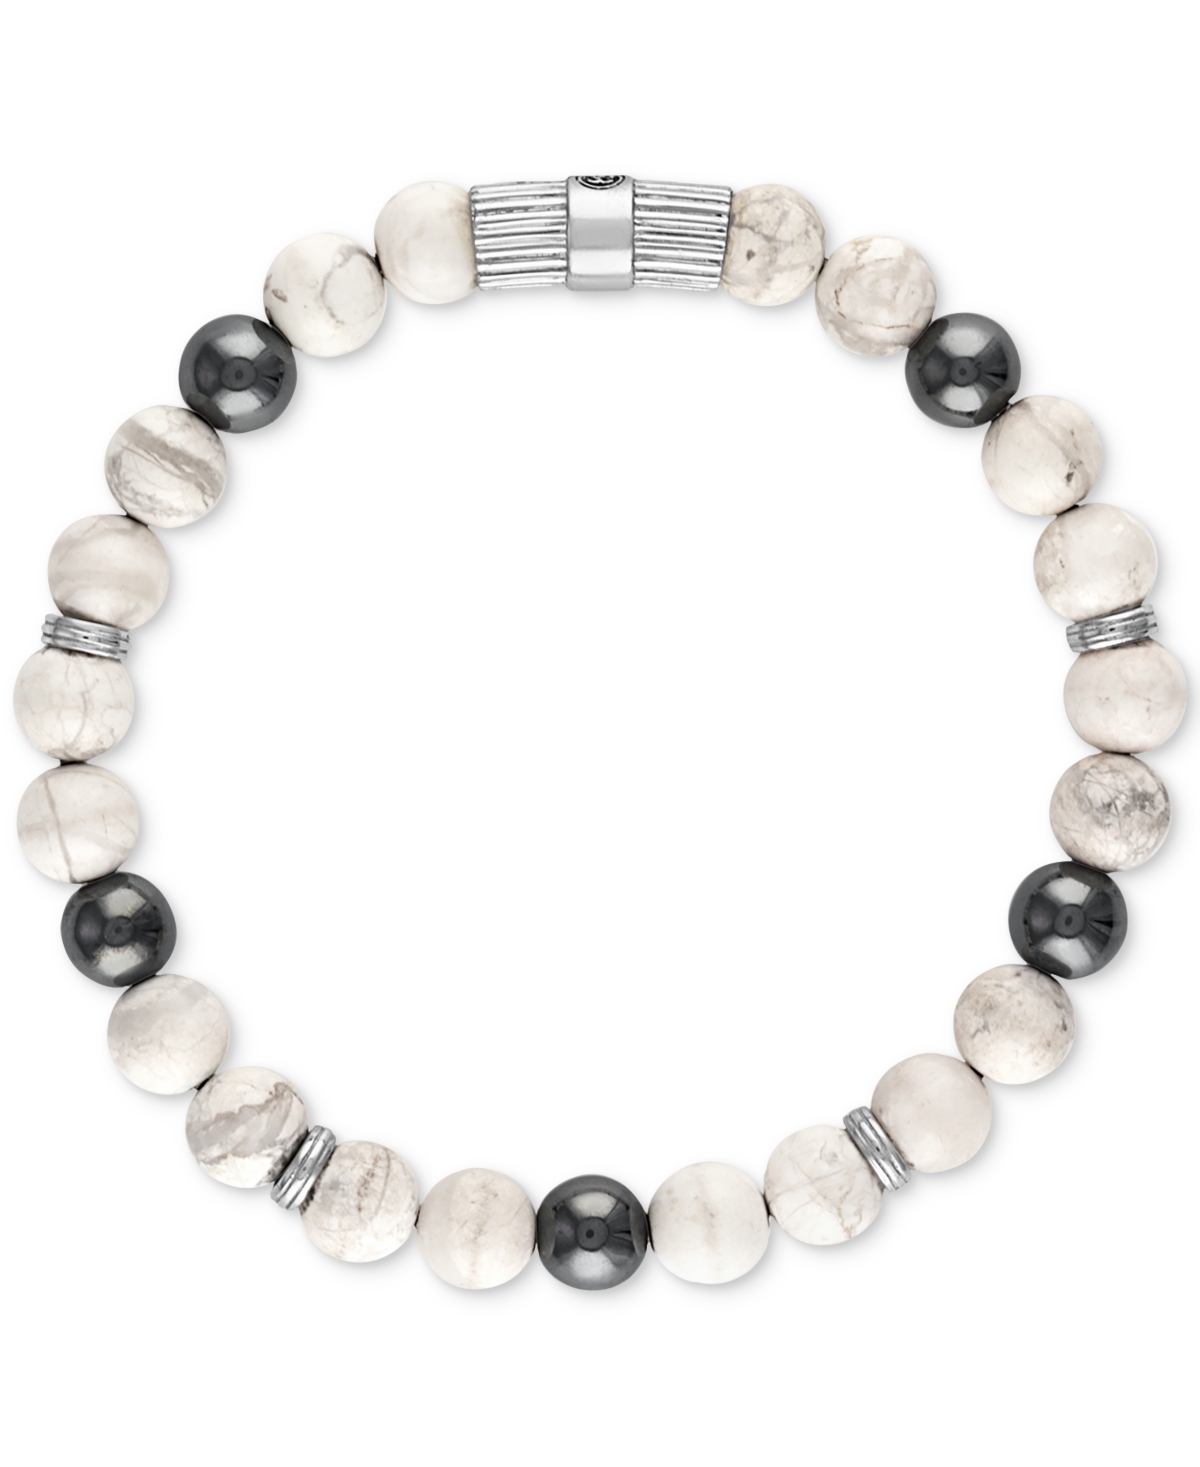 Esquire Men's Jewelry Howlite & Hematite Beaded Stretch Bracelet In Sterling Silver, Created For Macy's